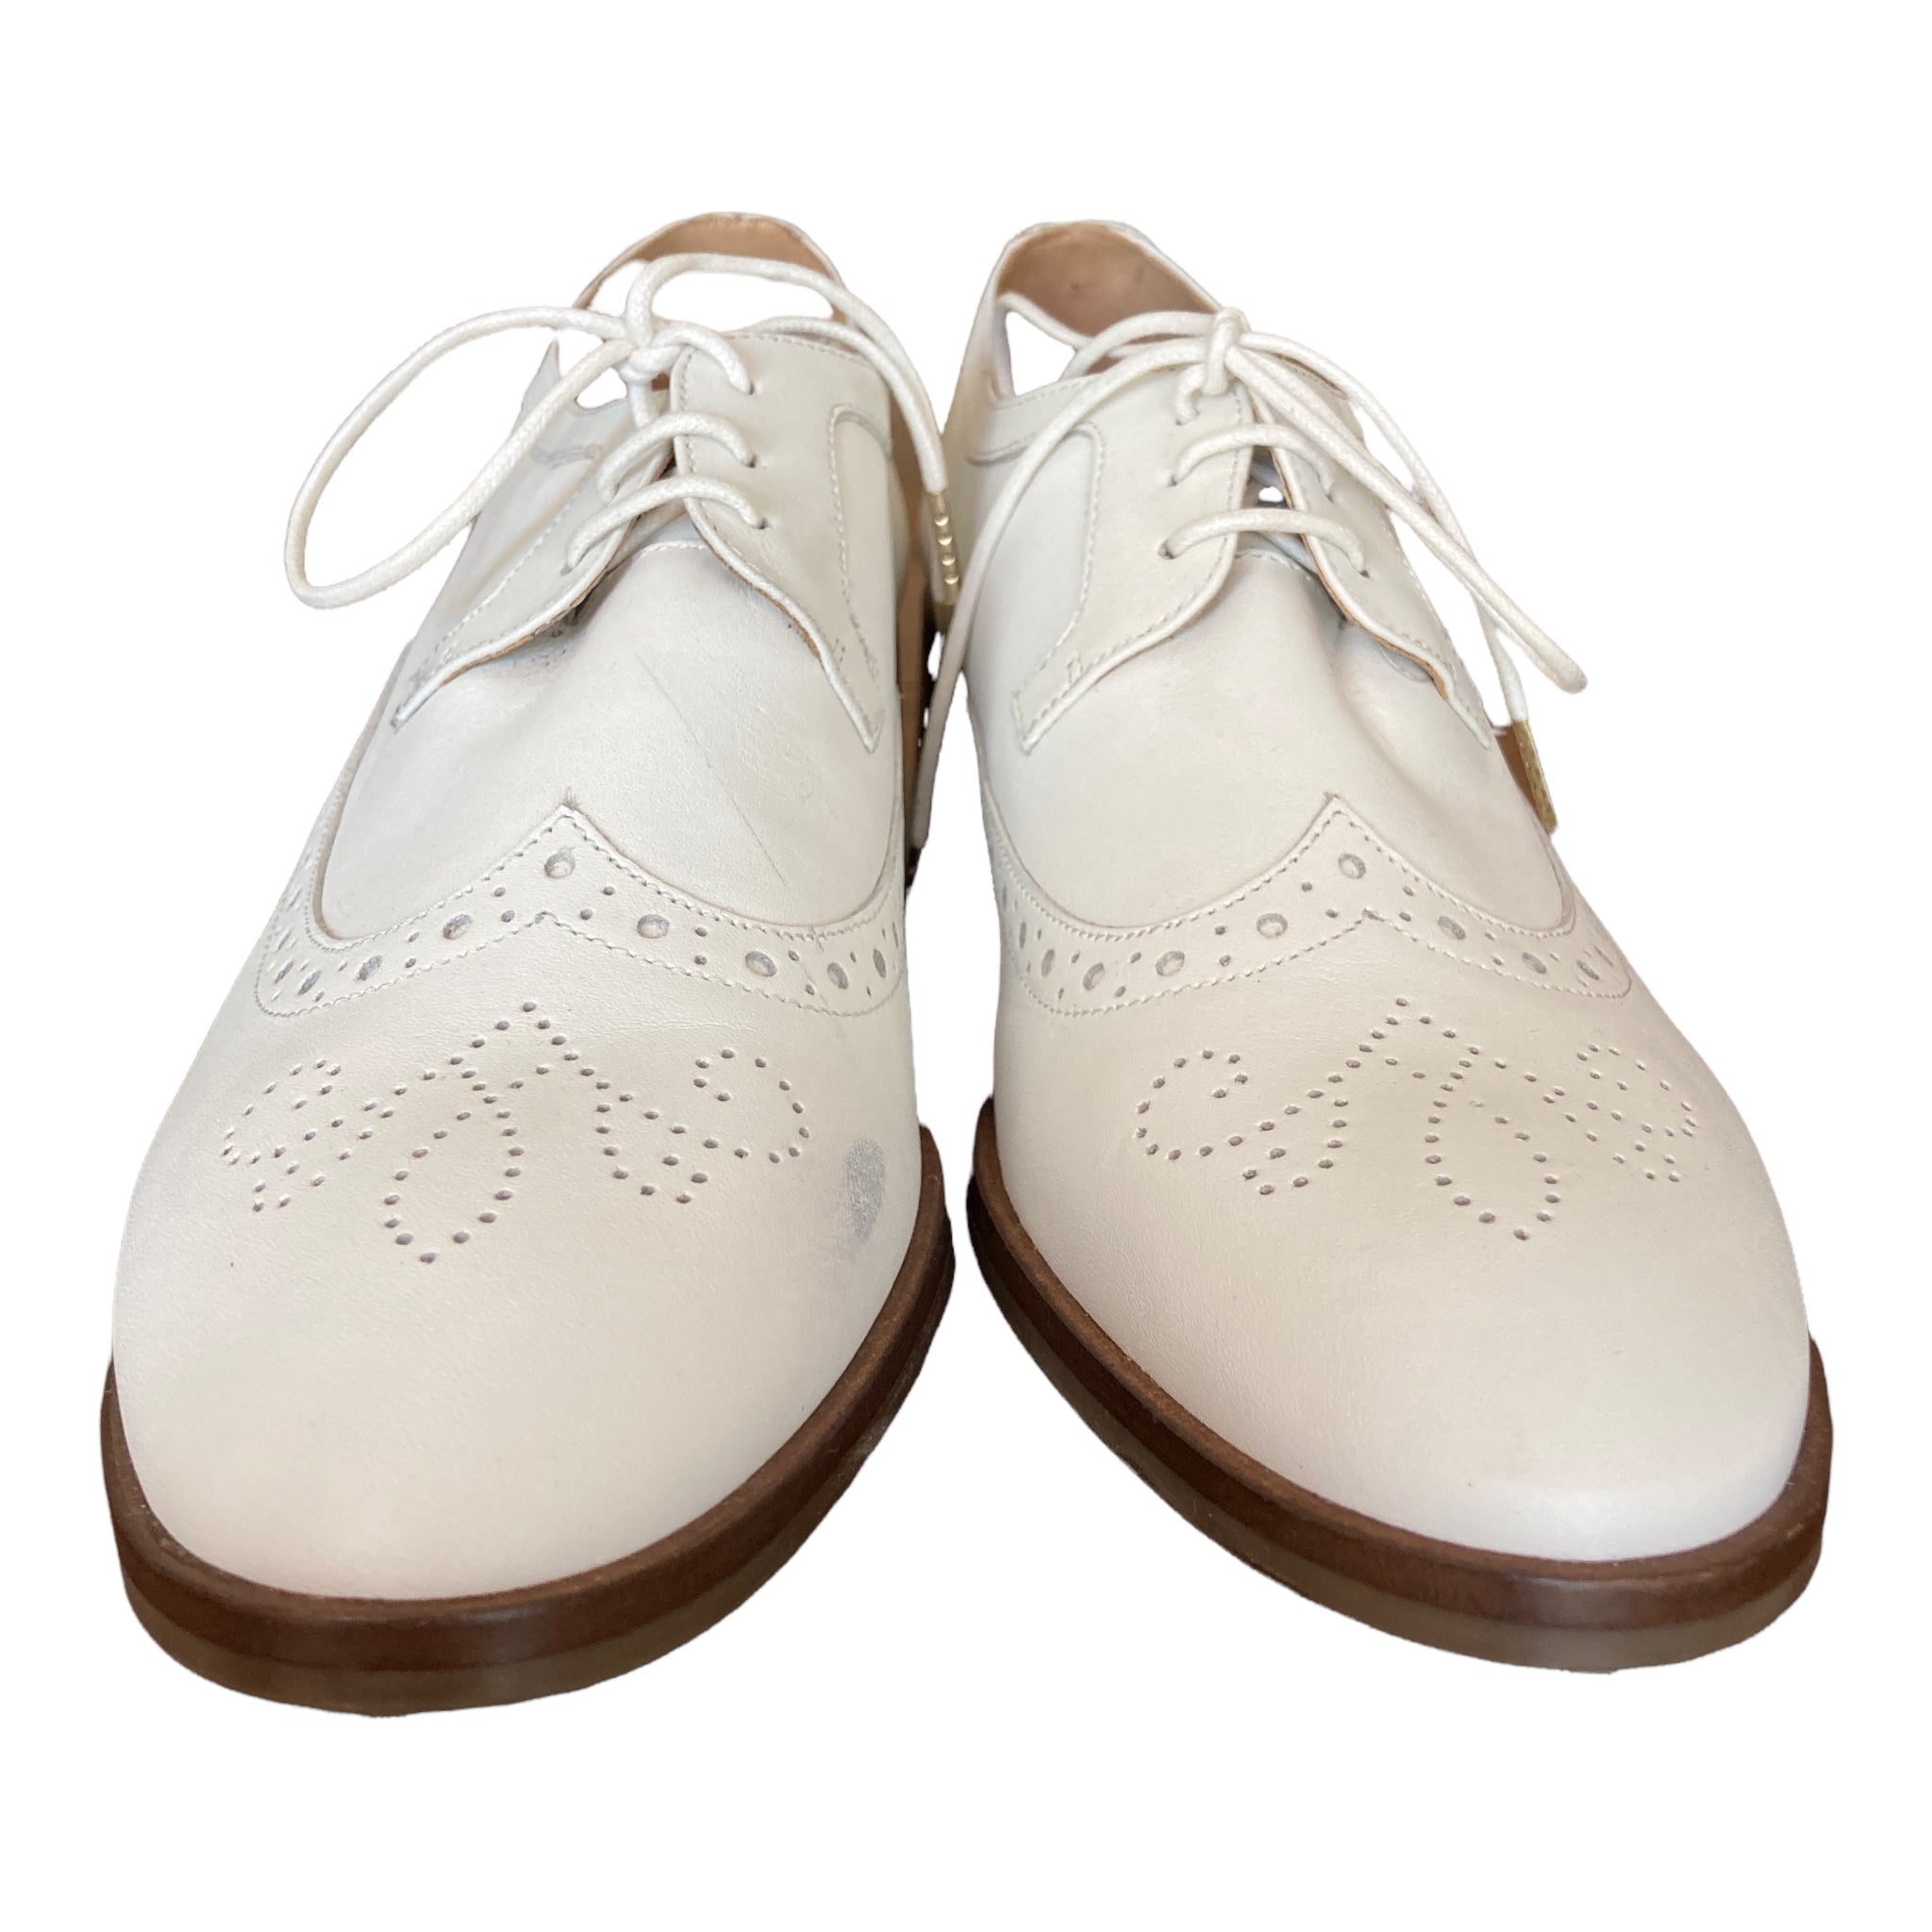 University student environment commonplace Bocage Innovation Wingtip White Shoes, 39 – Second Serve